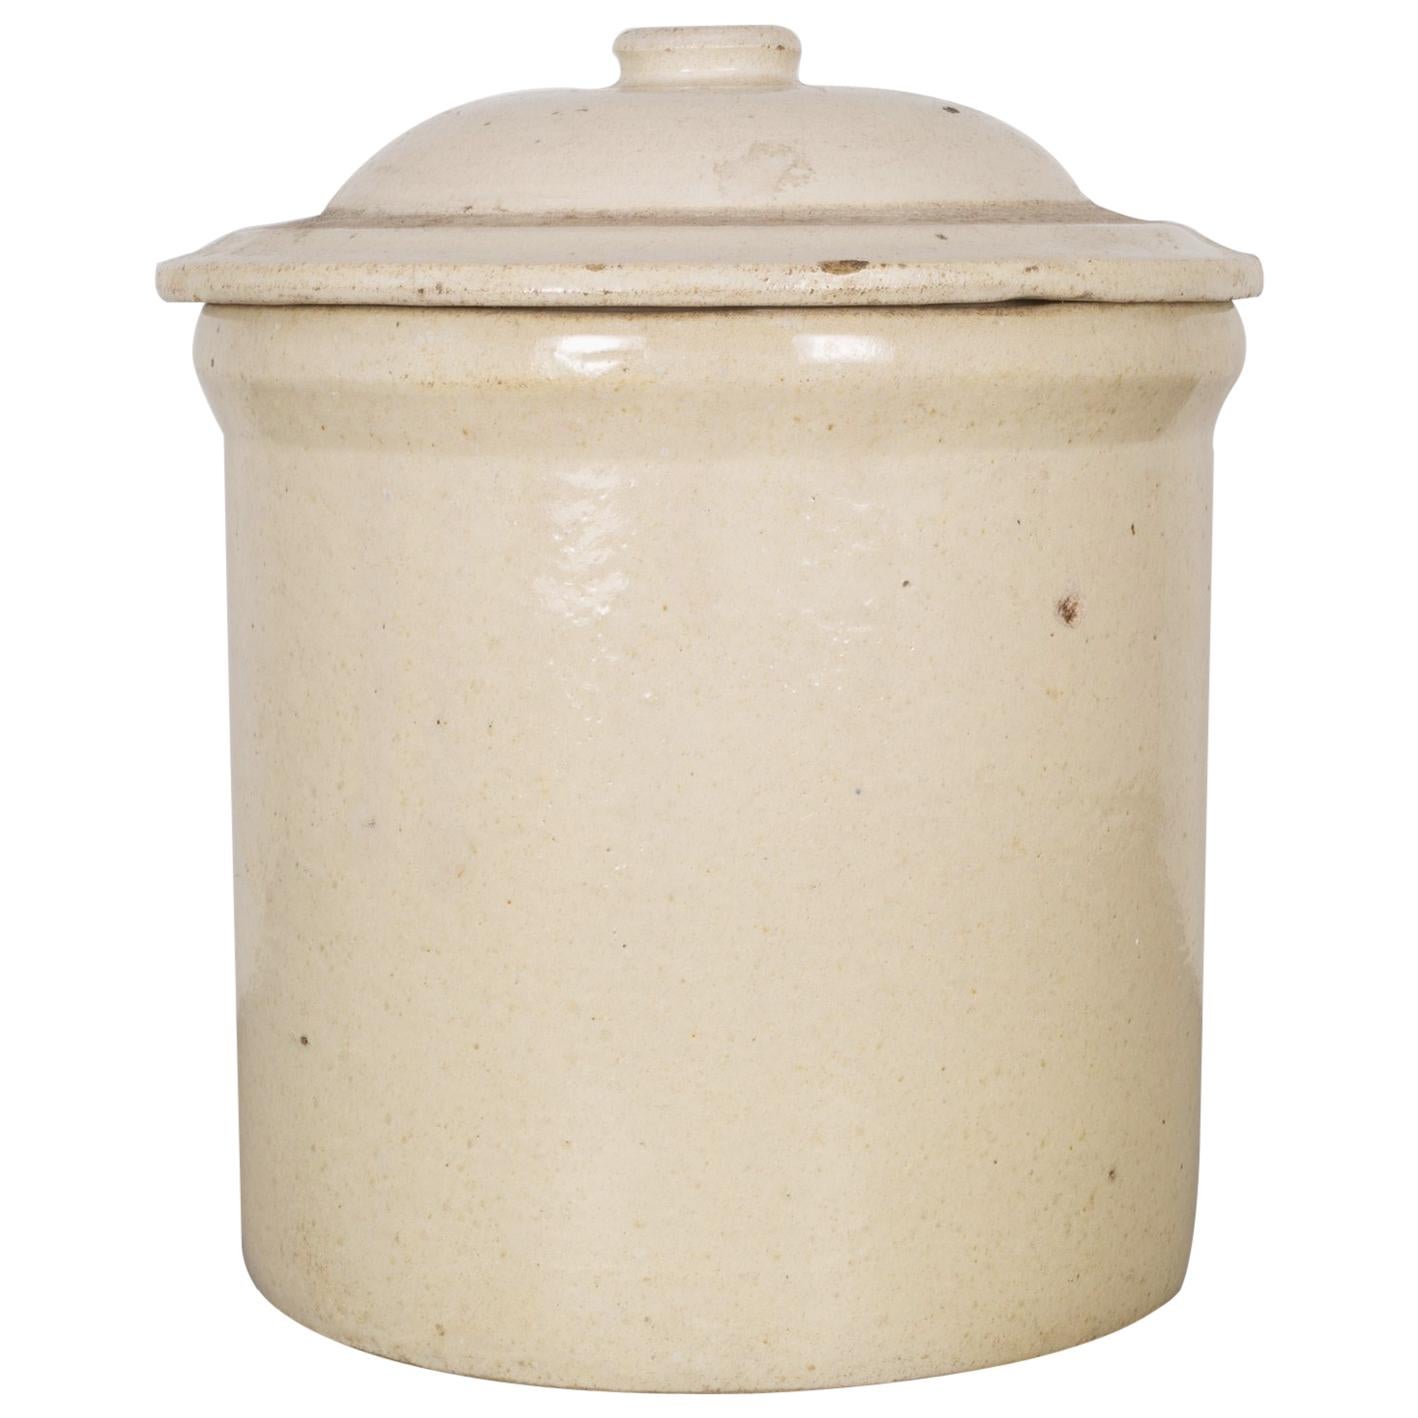 Ceramic Pickling Crock Unmarked with Lid, circa 1910